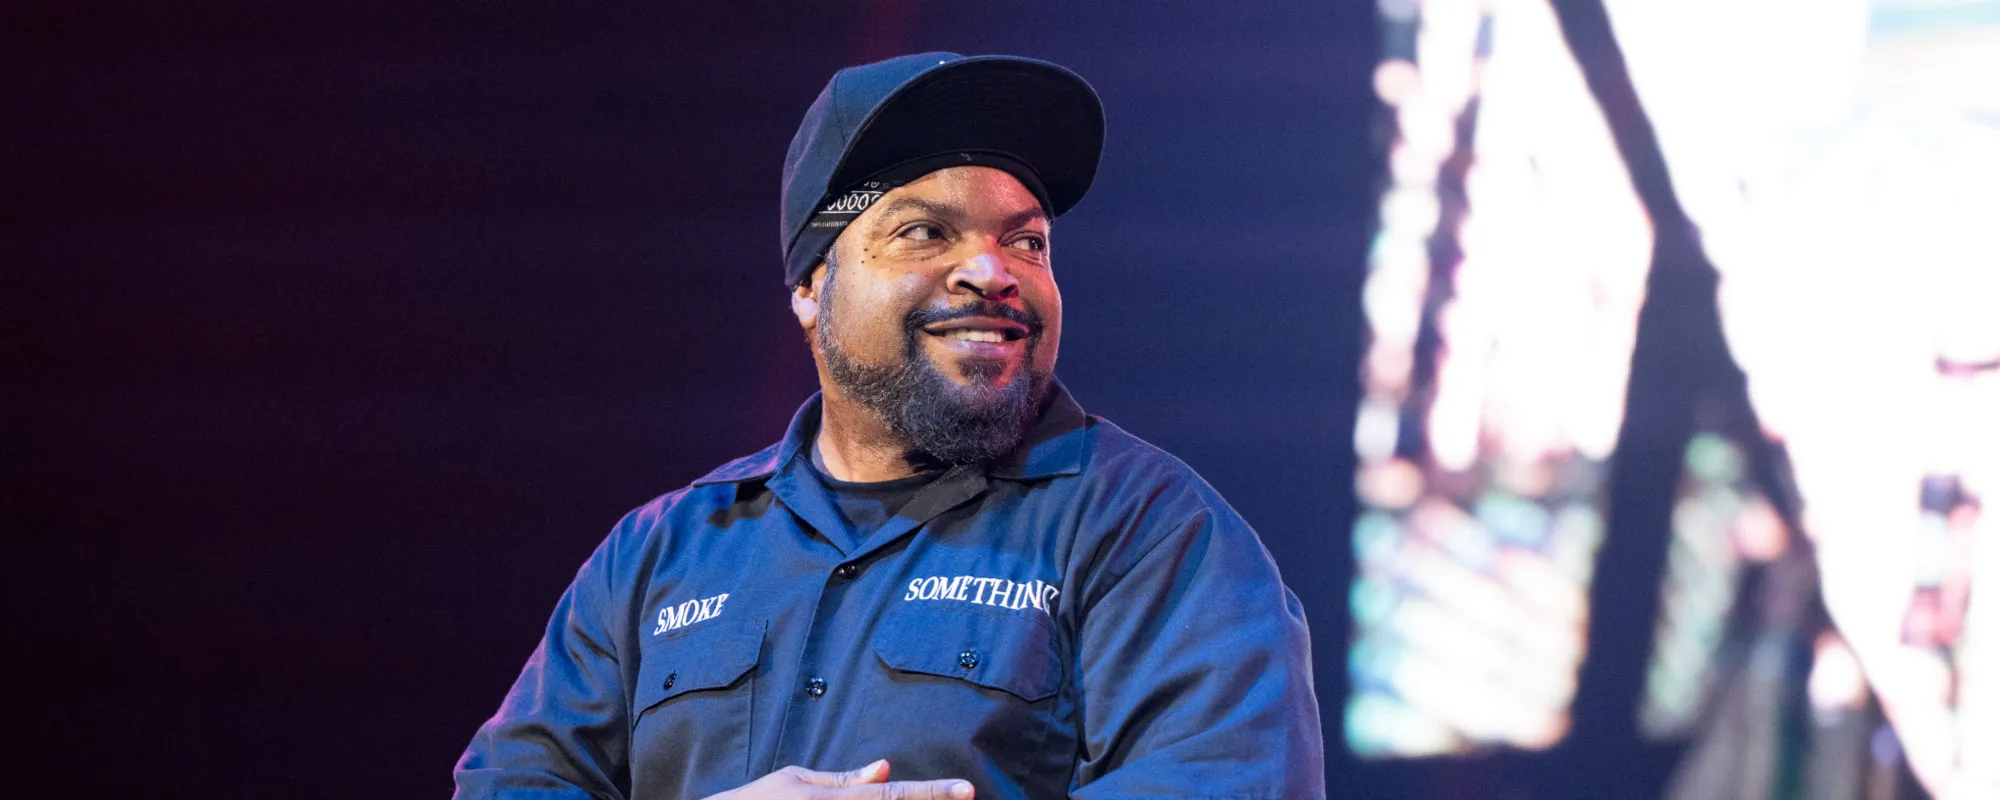 13 Pictures of Young Ice Cube From His NWA Days